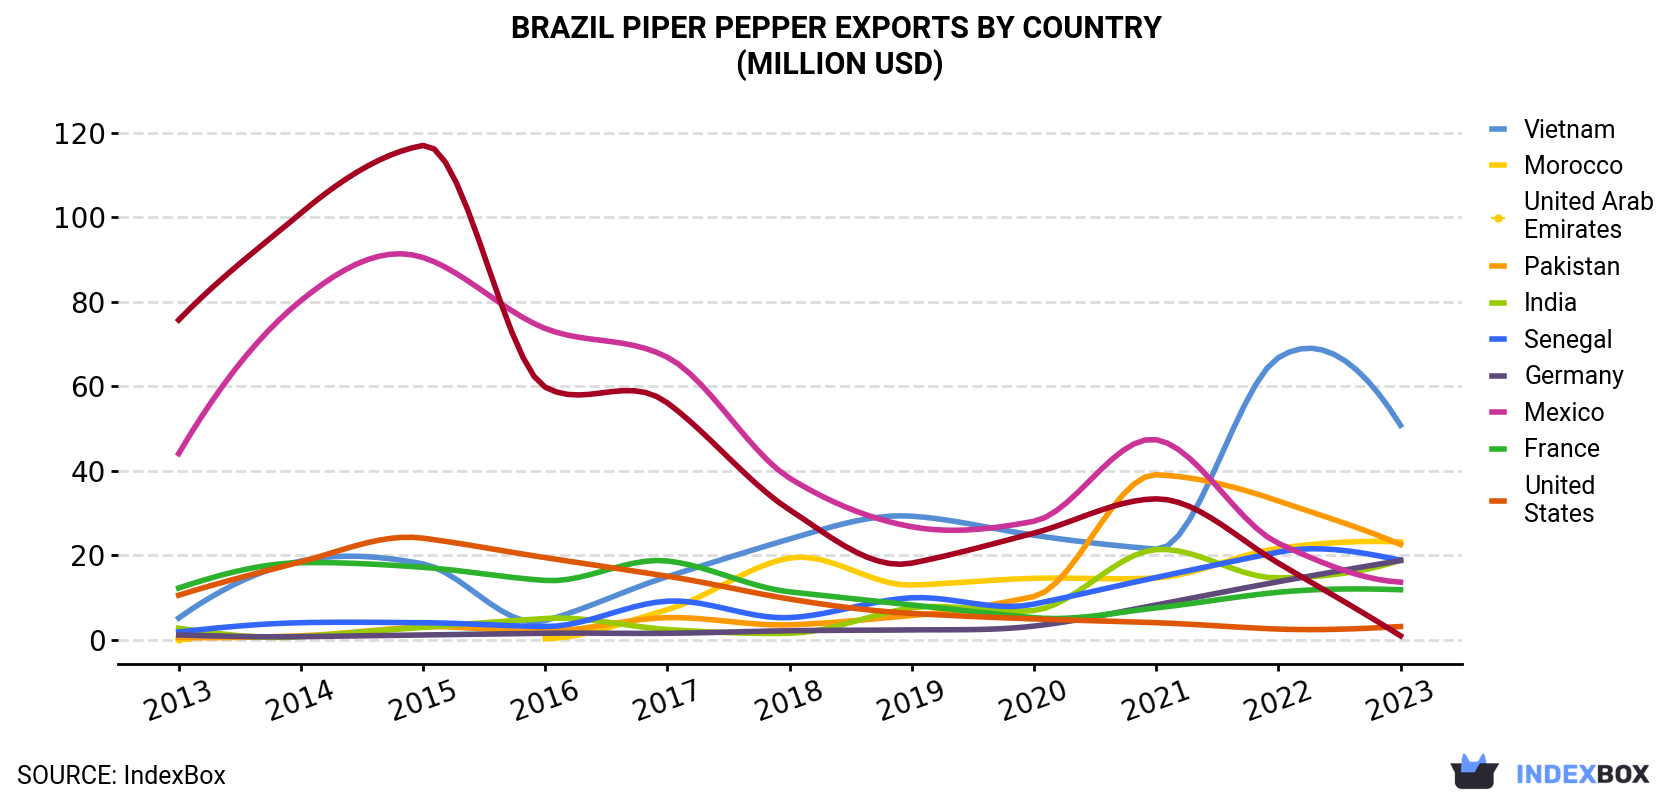 Brazil Piper Pepper Exports By Country (Million USD)